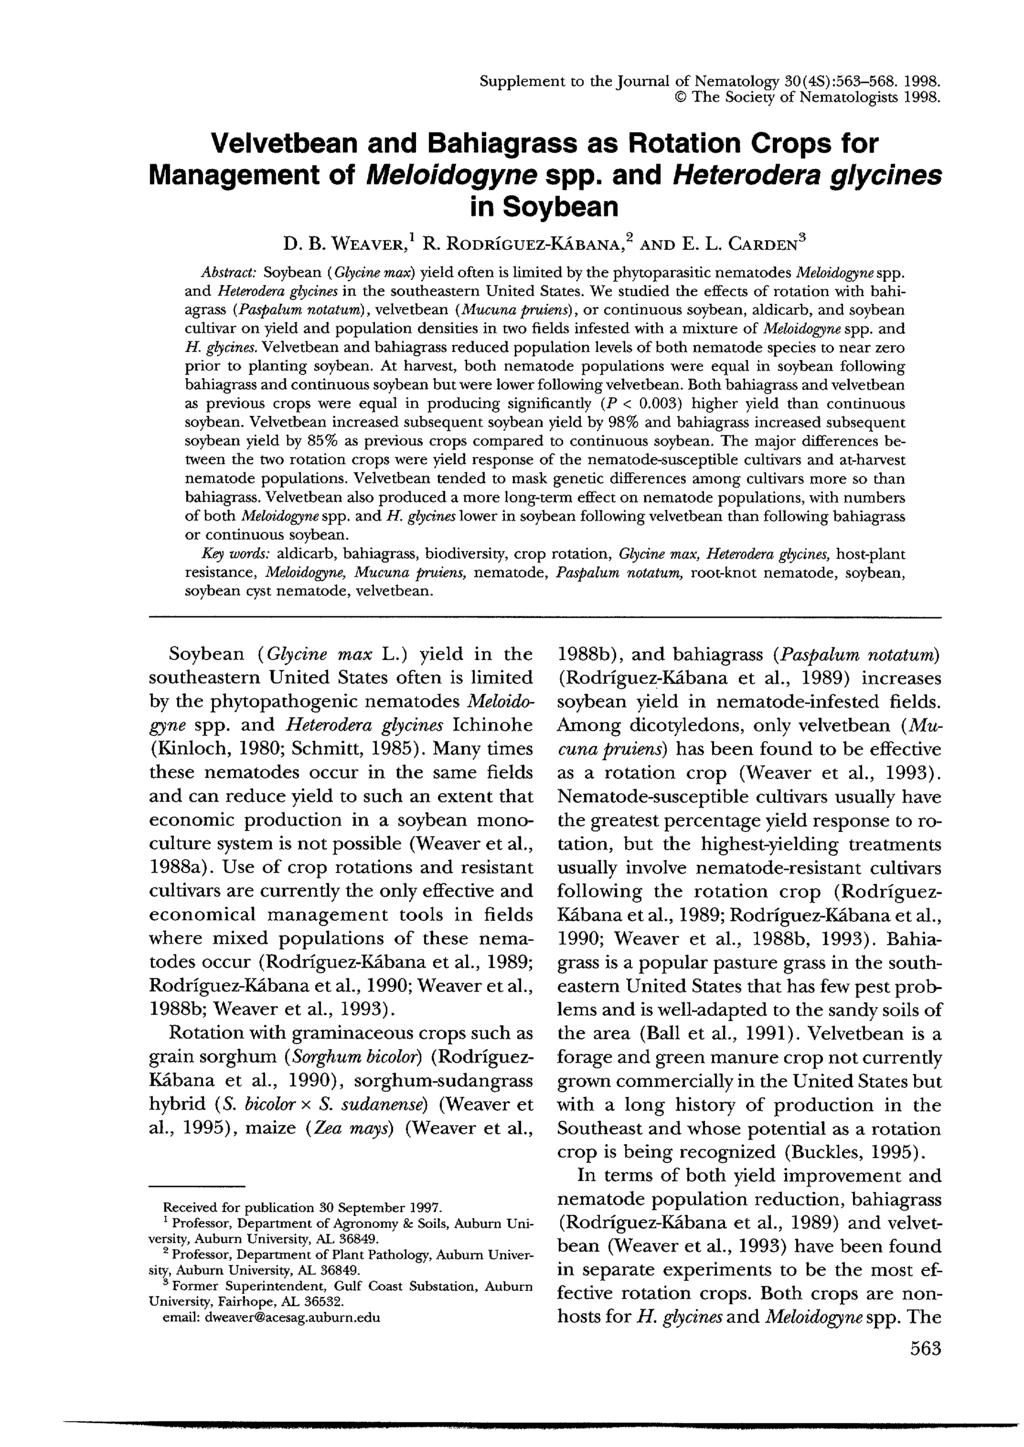 Supplement to the Journal of Nematology 30 (4S):563-568. 1998. The Society of Nematologists 1998. Velvetbean and Bahiagrass as Rotation Crops for Management of Meloidogyne spp.